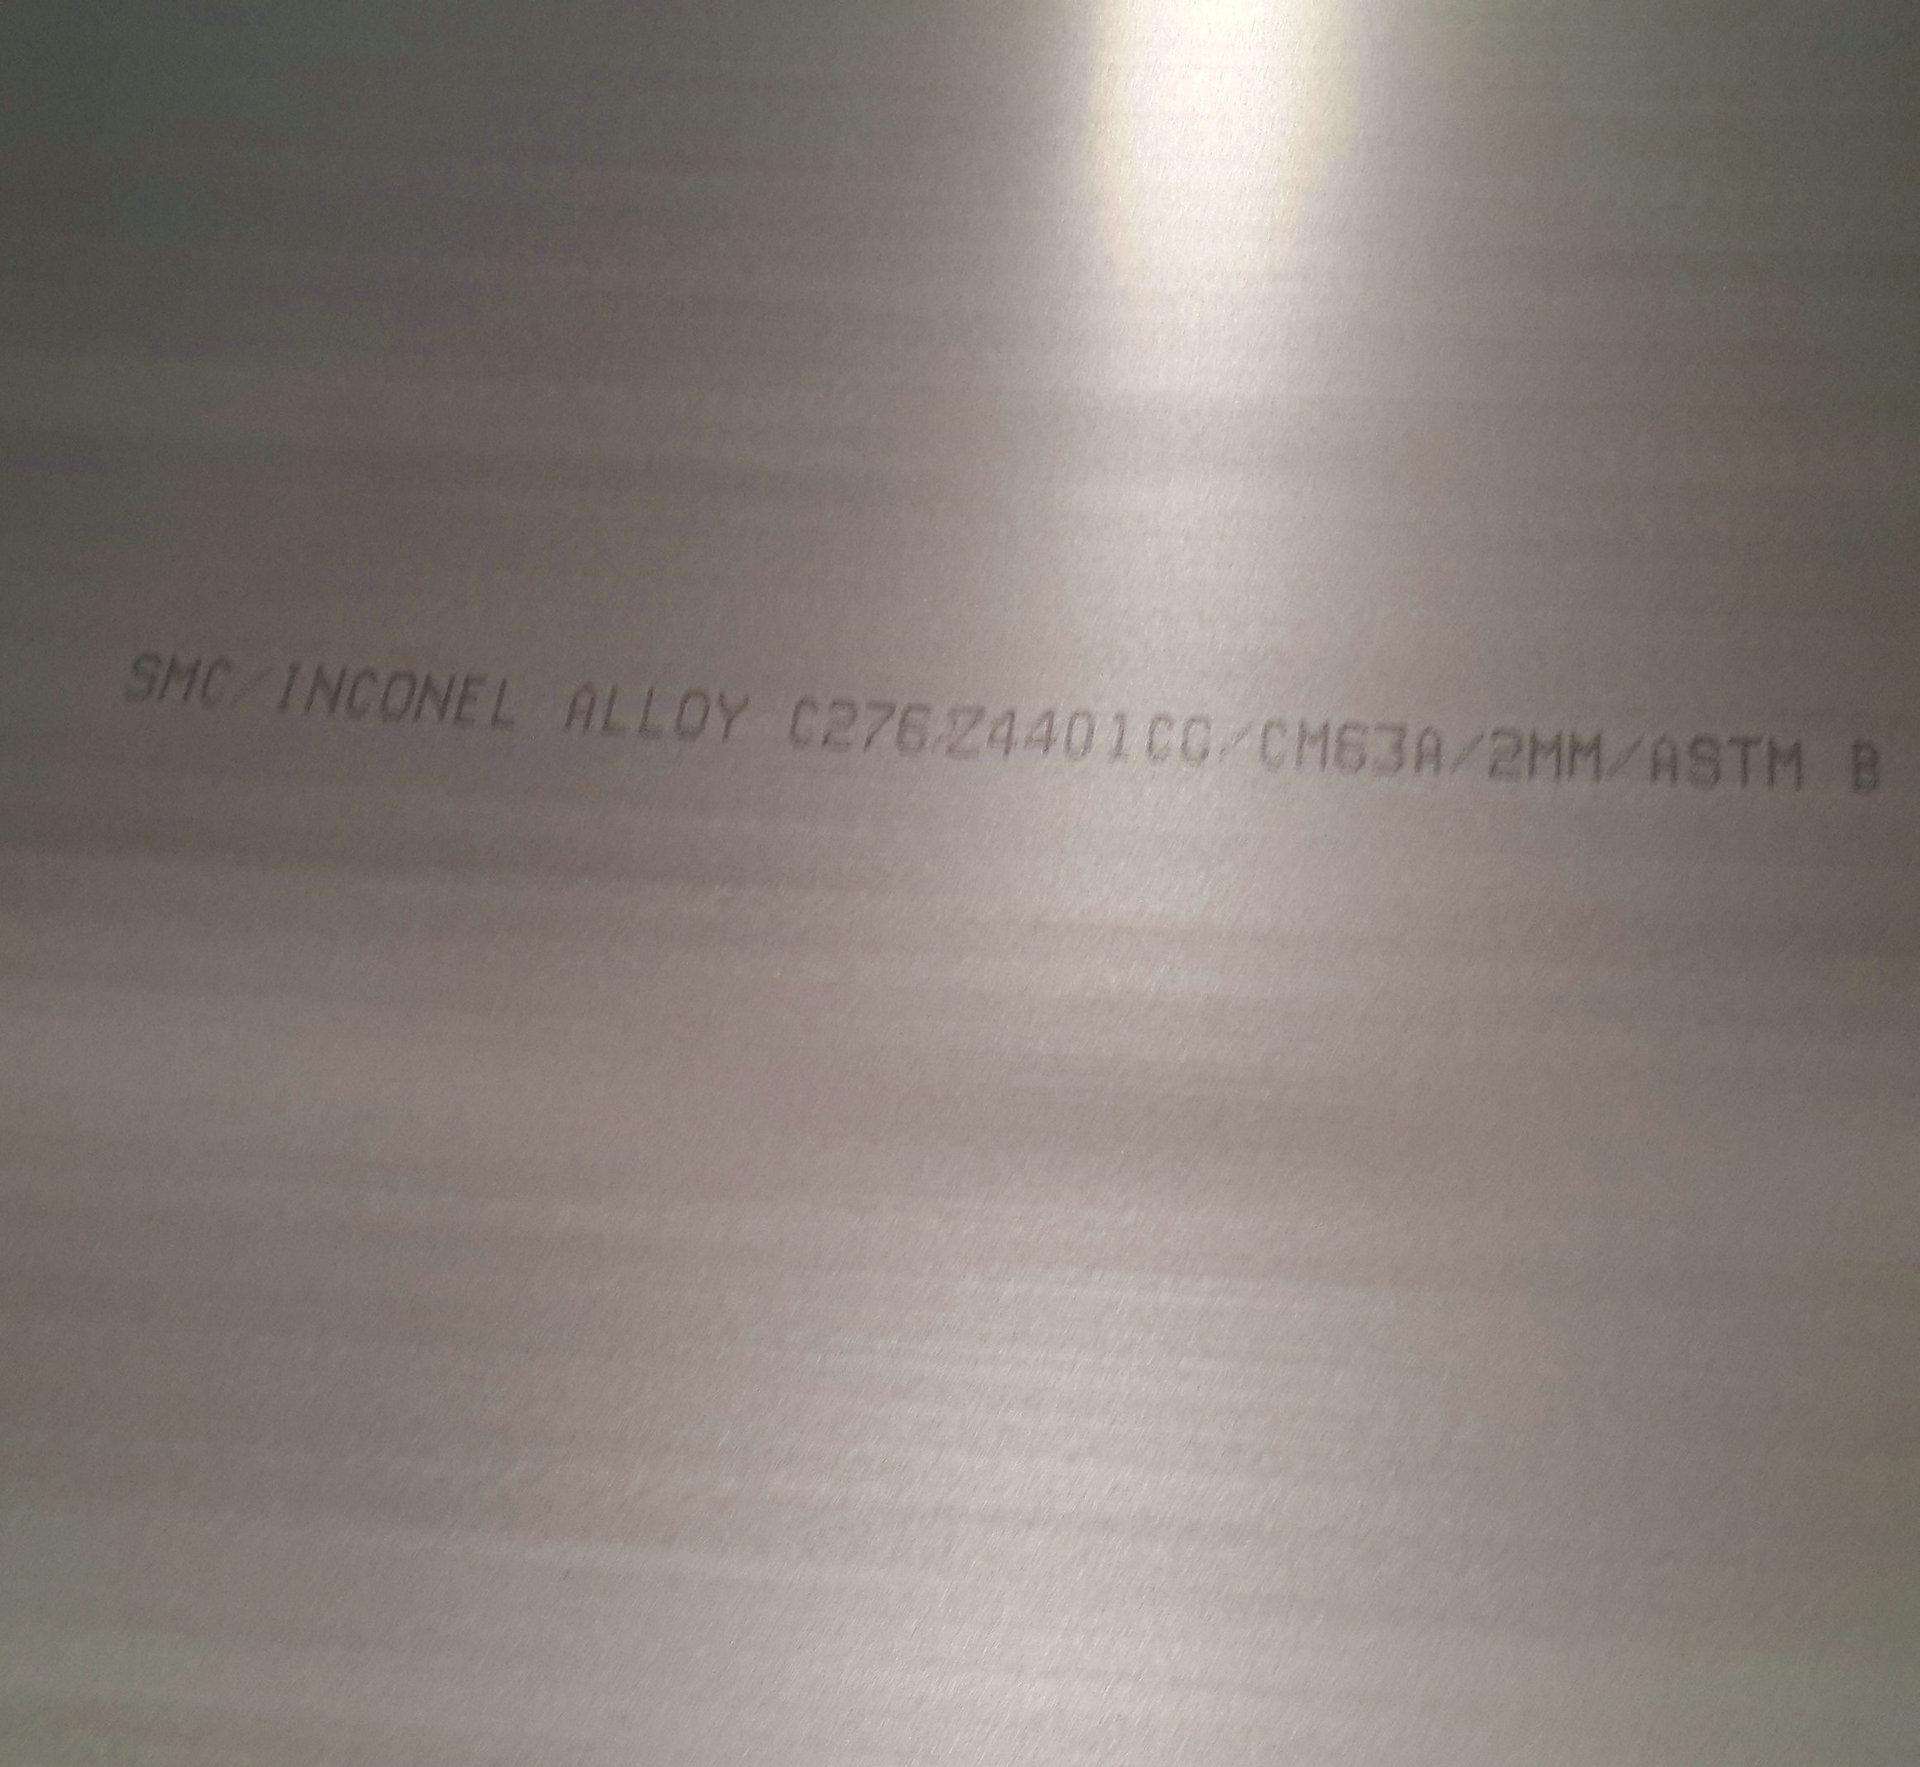 OEM/ODM Manufacturer Alloy Steel Tube - Nickel Alloy Plate/sheet inconel 600 601 625 X-750 718 825 – Join